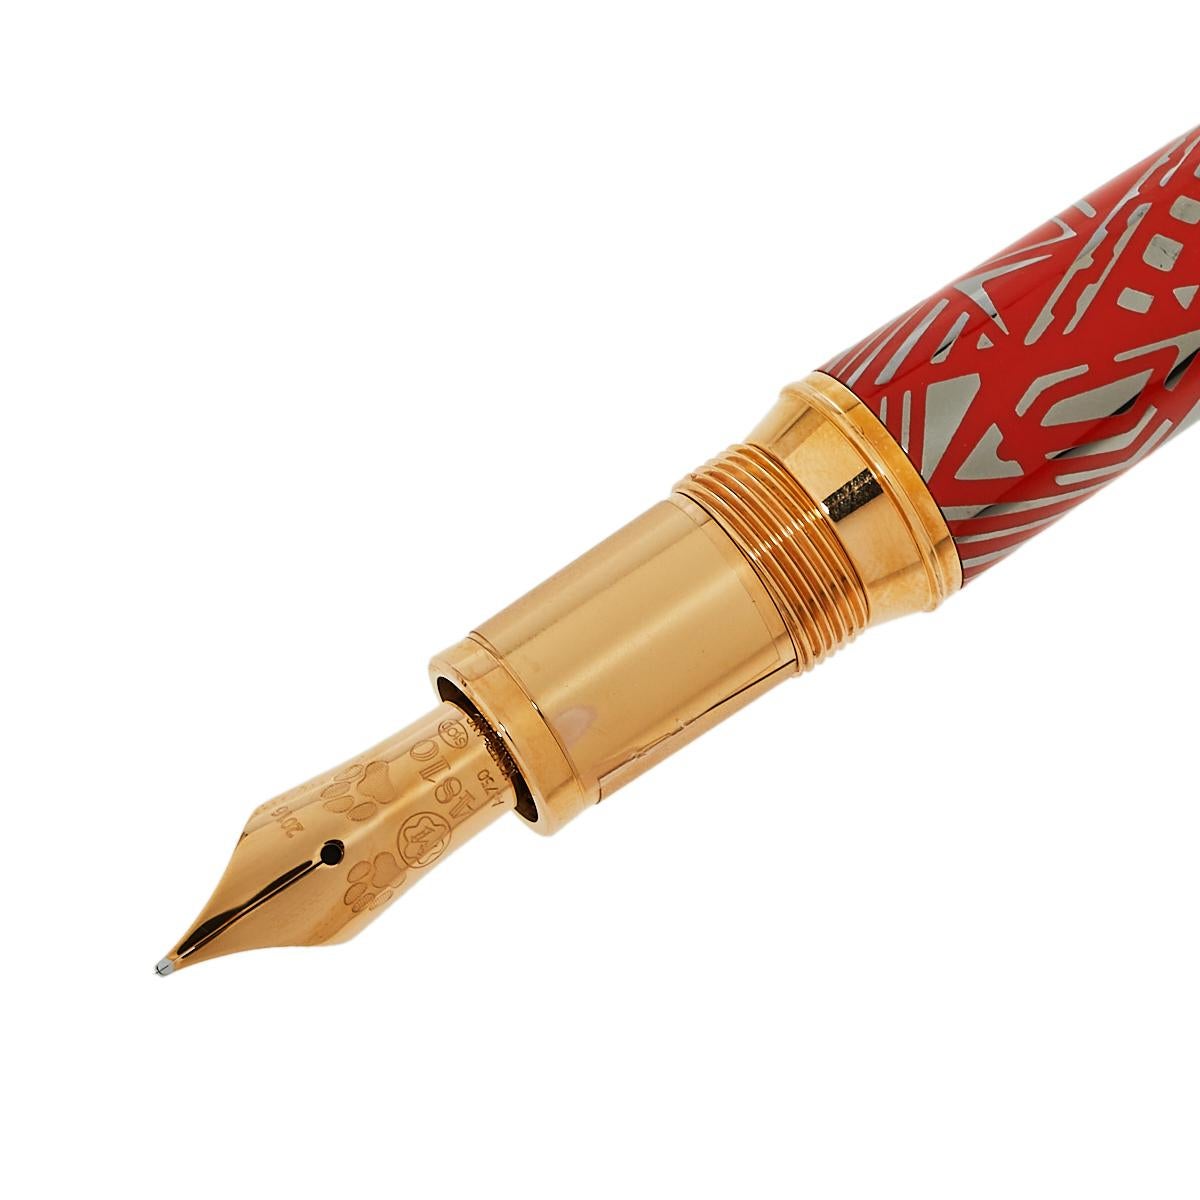 Montblanc is well-known for its Patron of Art Editions and this Limited Edition Fountain pen is in honor of Peggy Guggenheim who was a renowned art collector. The pen has a lacquer body with gold-plated fittings and an 18k gold nib that has been